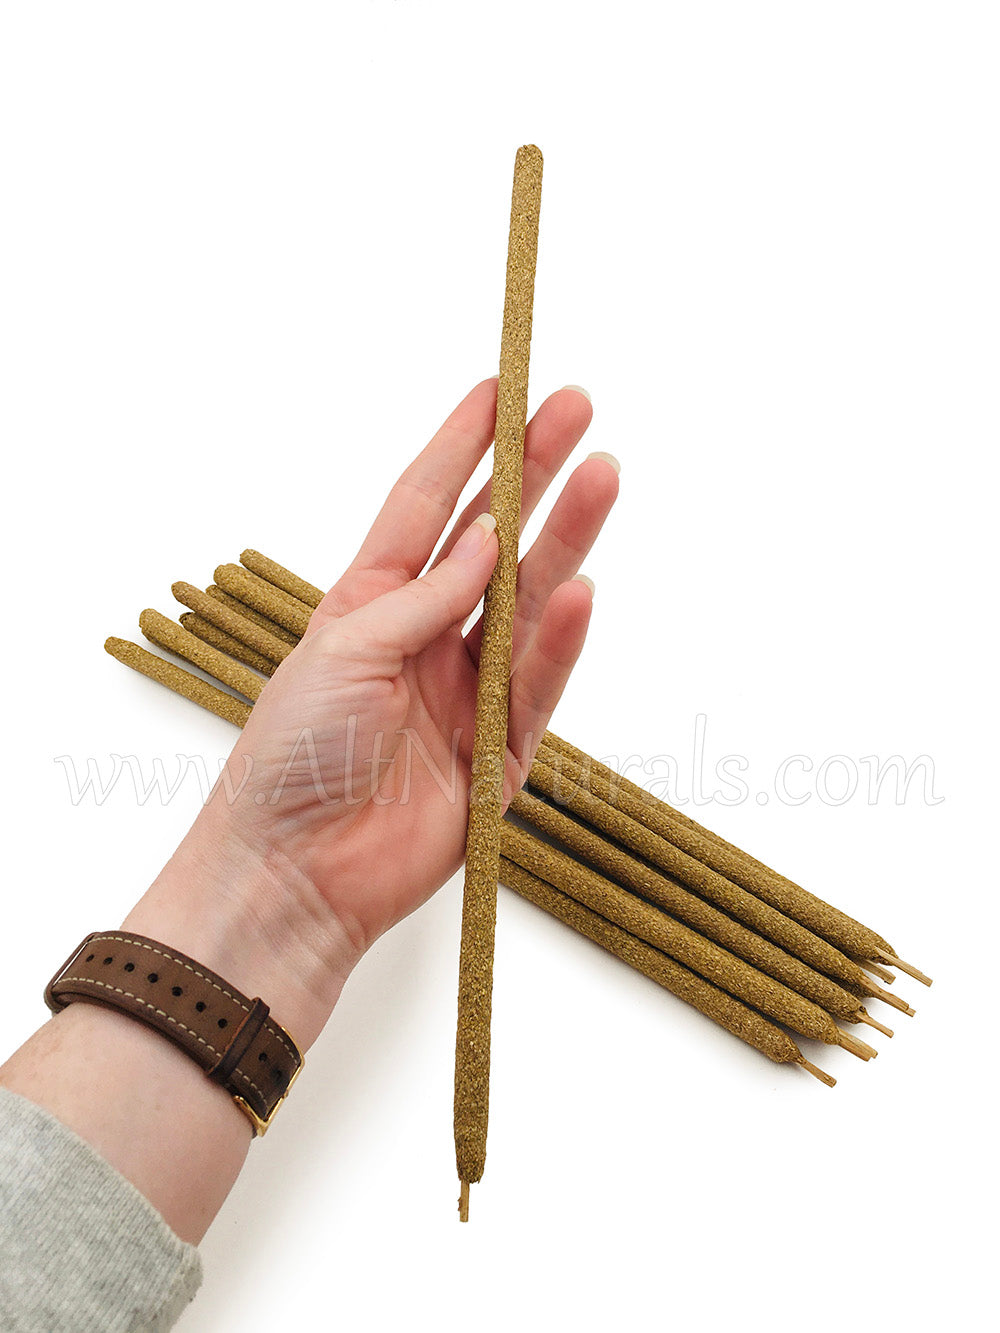 Rolled Palo Santo Incense